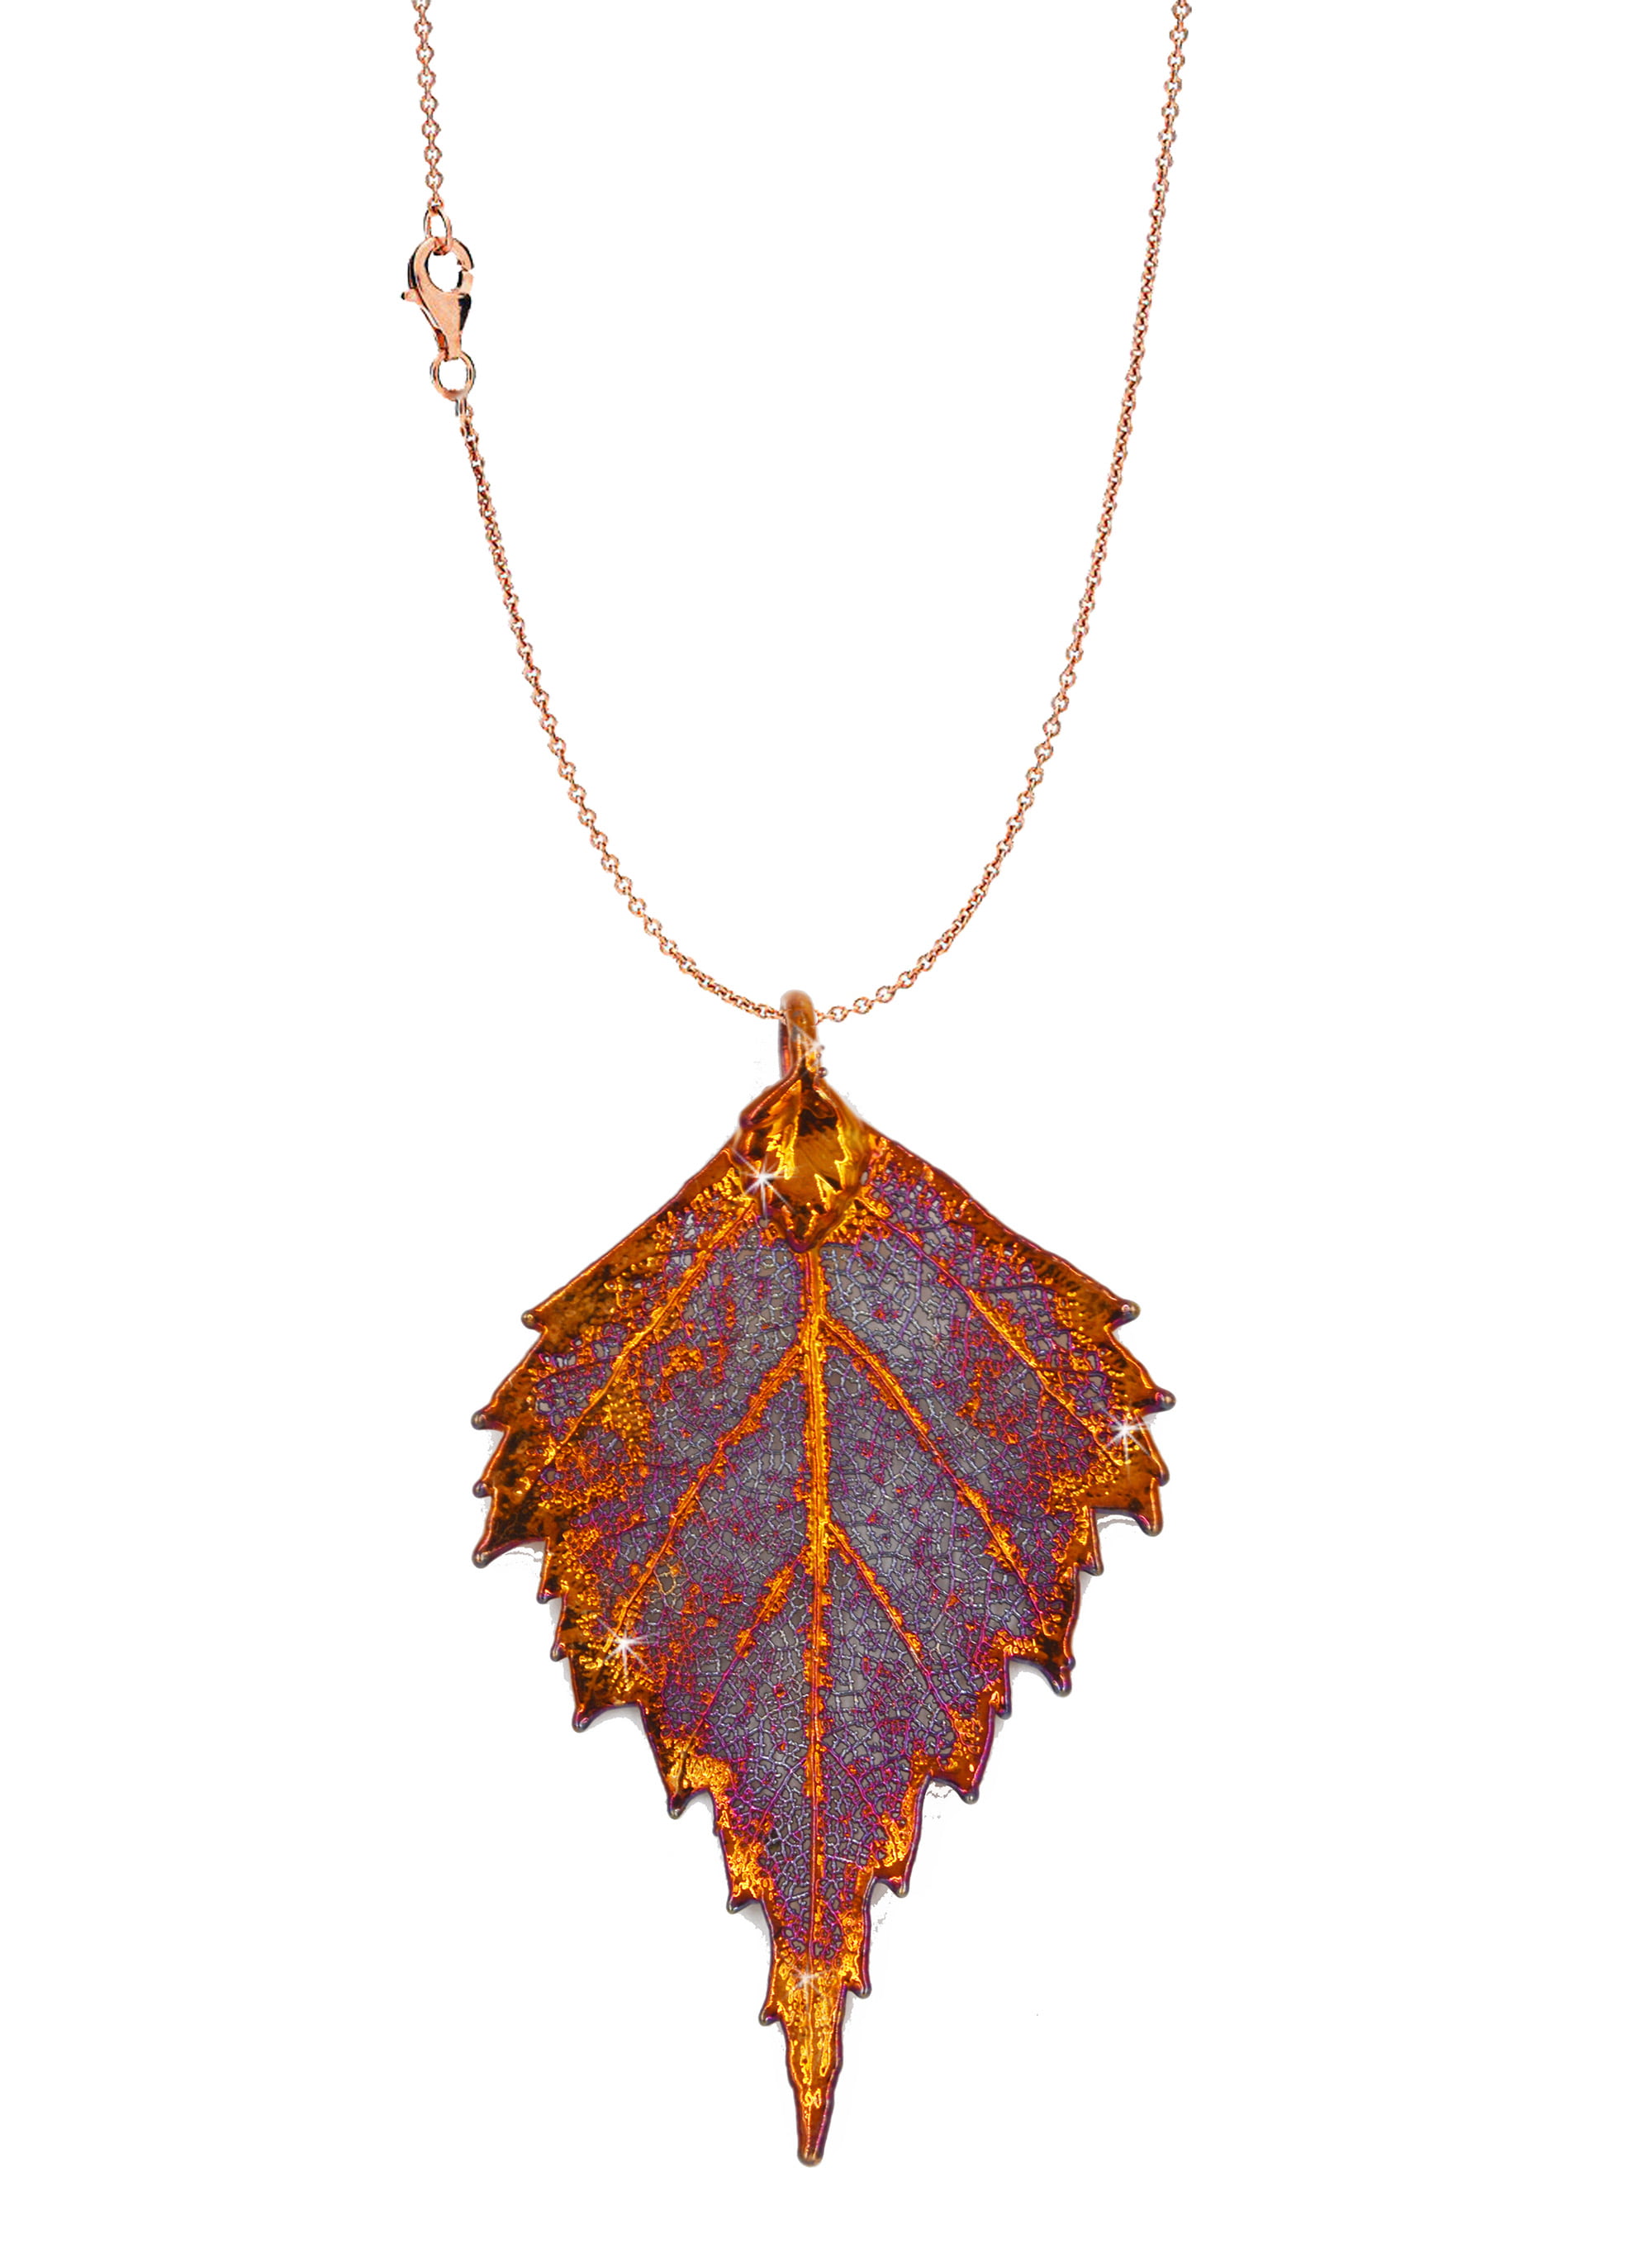 24k Gold/Iridescent Copper Dipped Double Evergreen Leaf Necklace